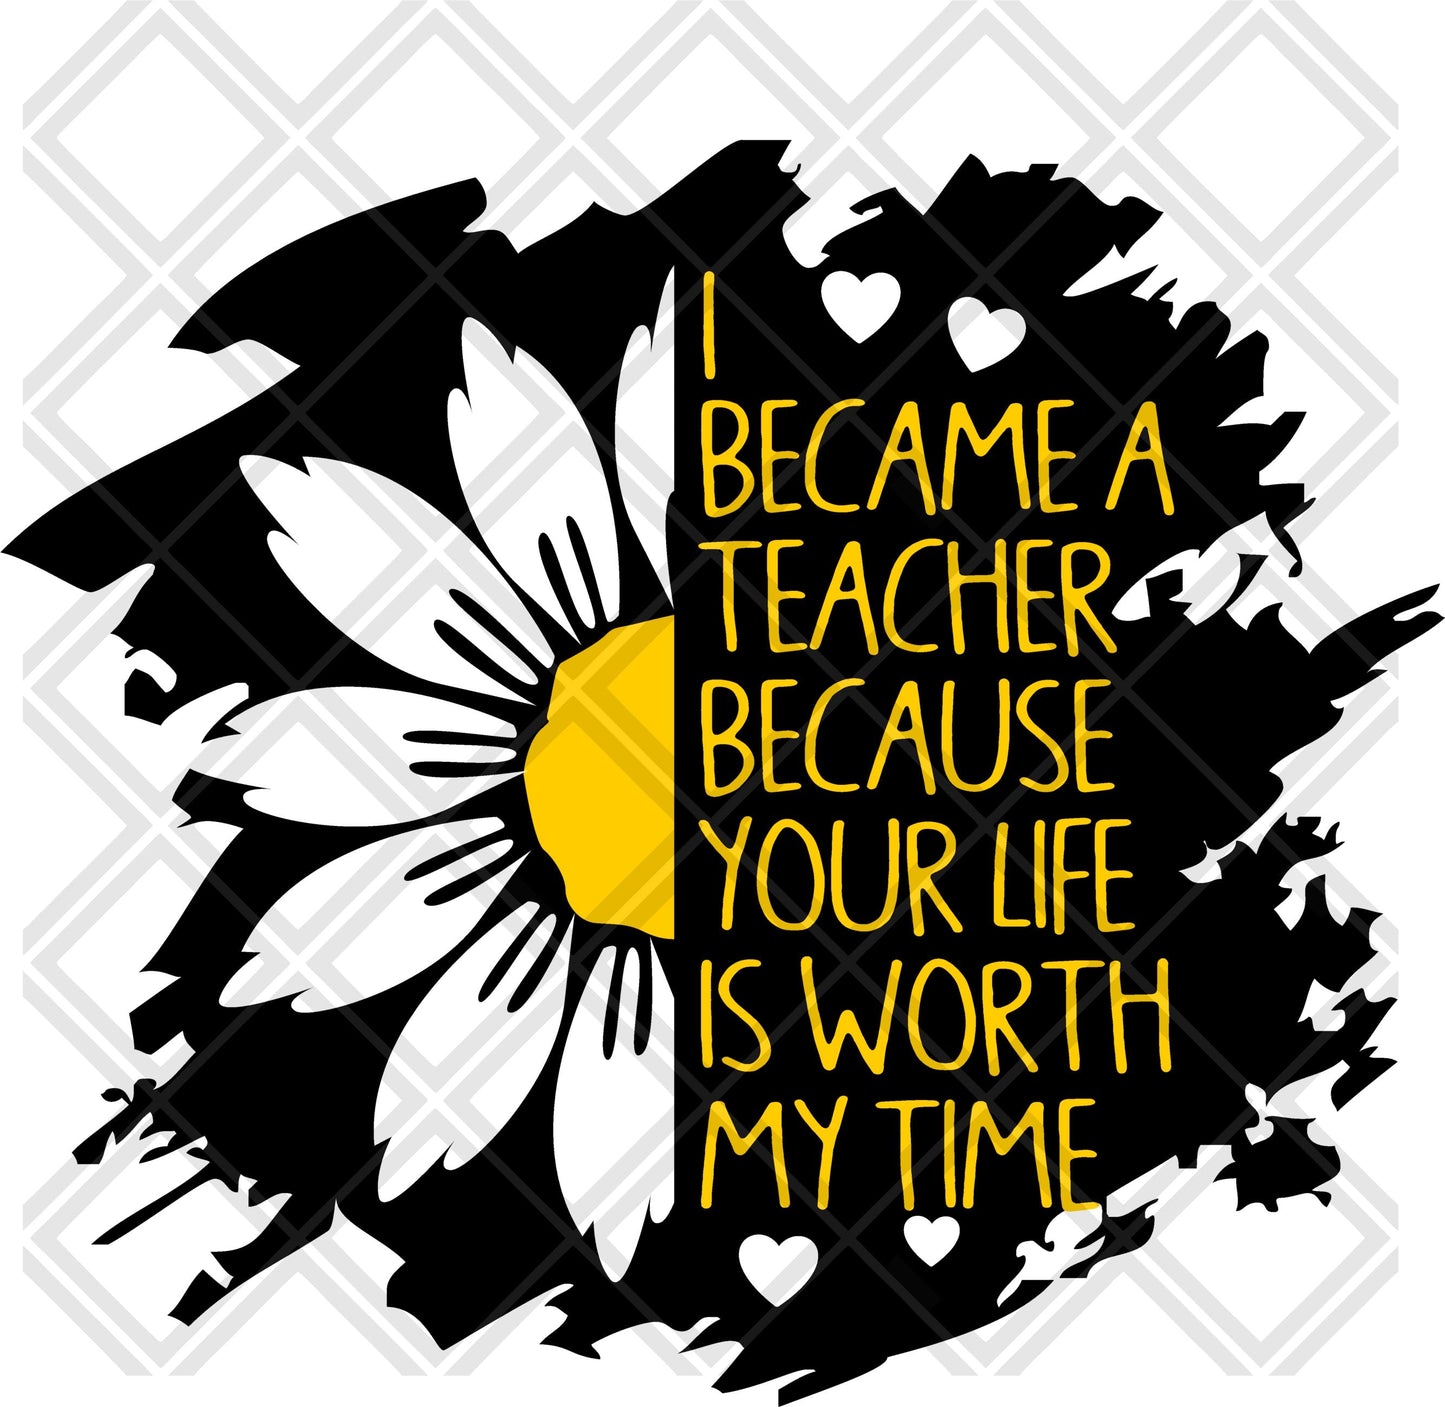 i became a teacher because your life is worth my time  DTF TRANSFERPRINT TO ORDER